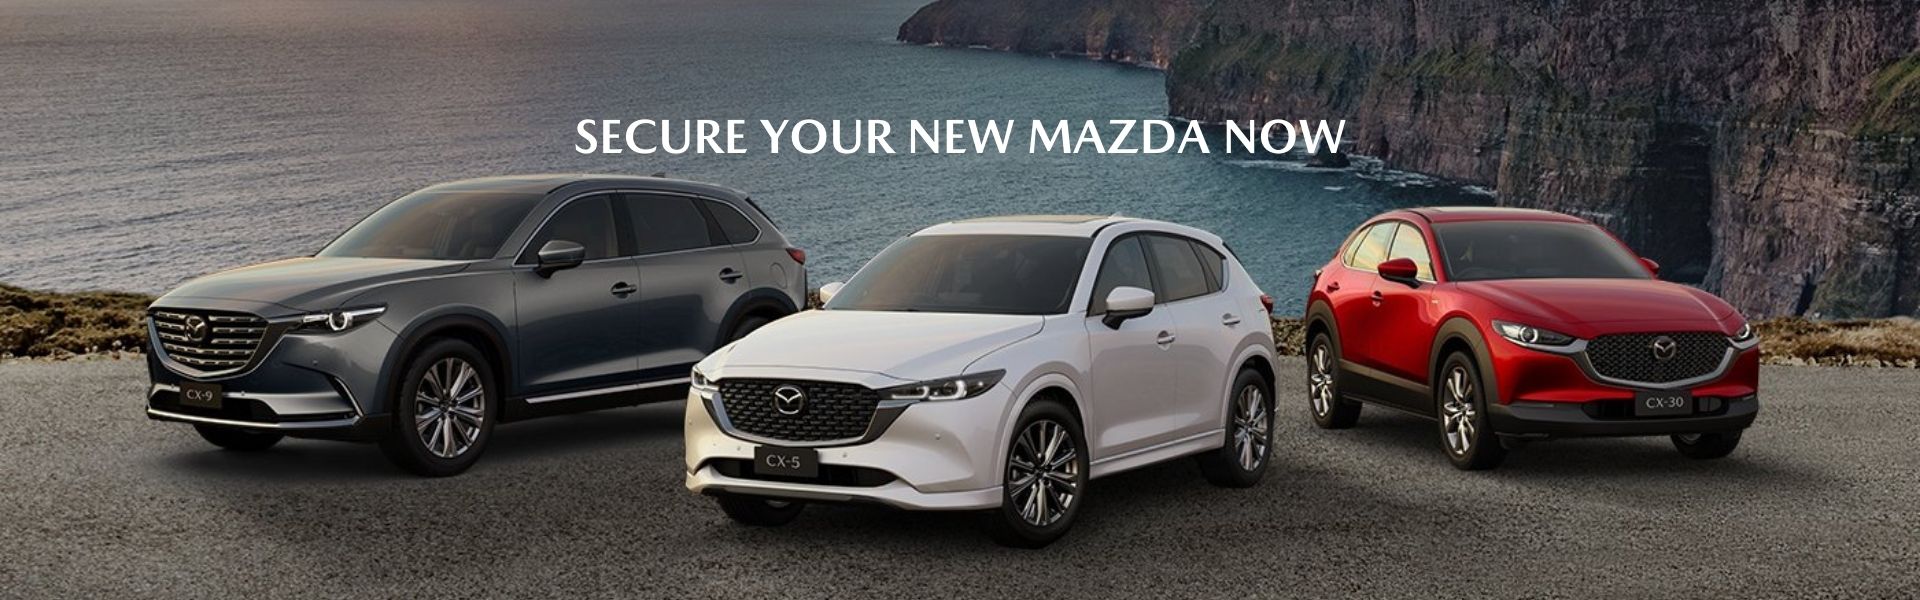 Mazda Own It Moment